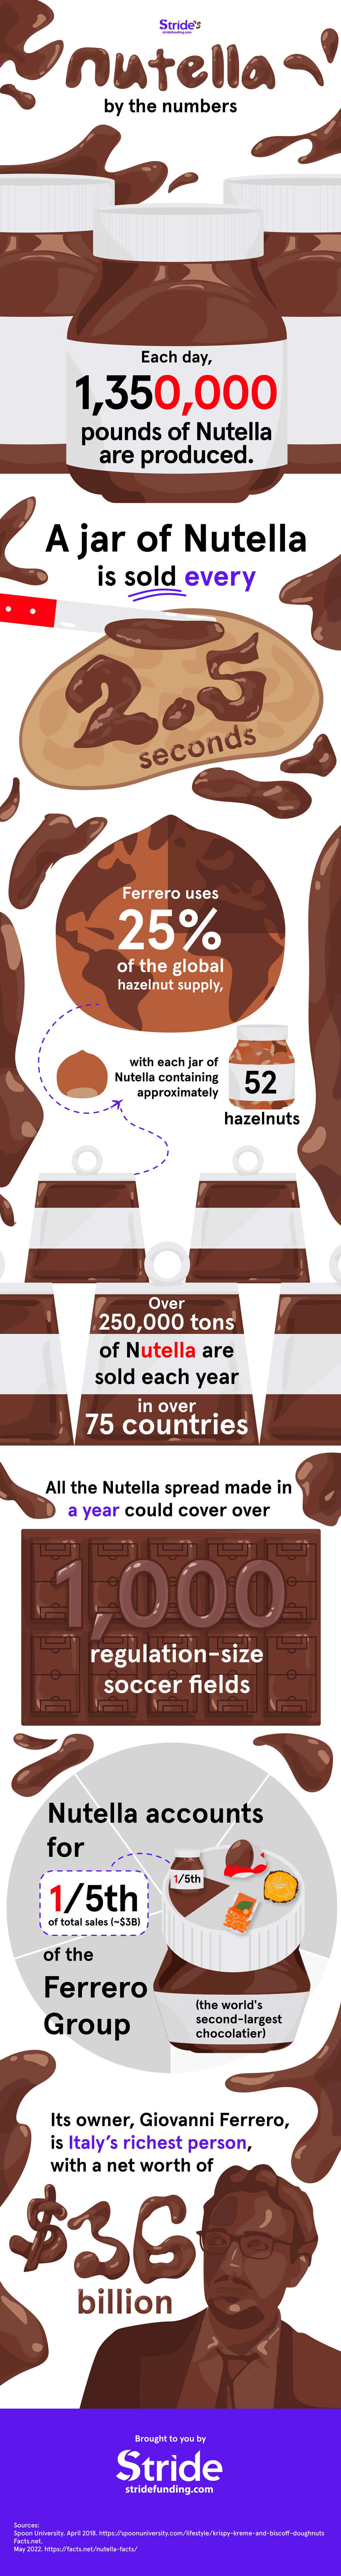 Nutella by the numbers infographic